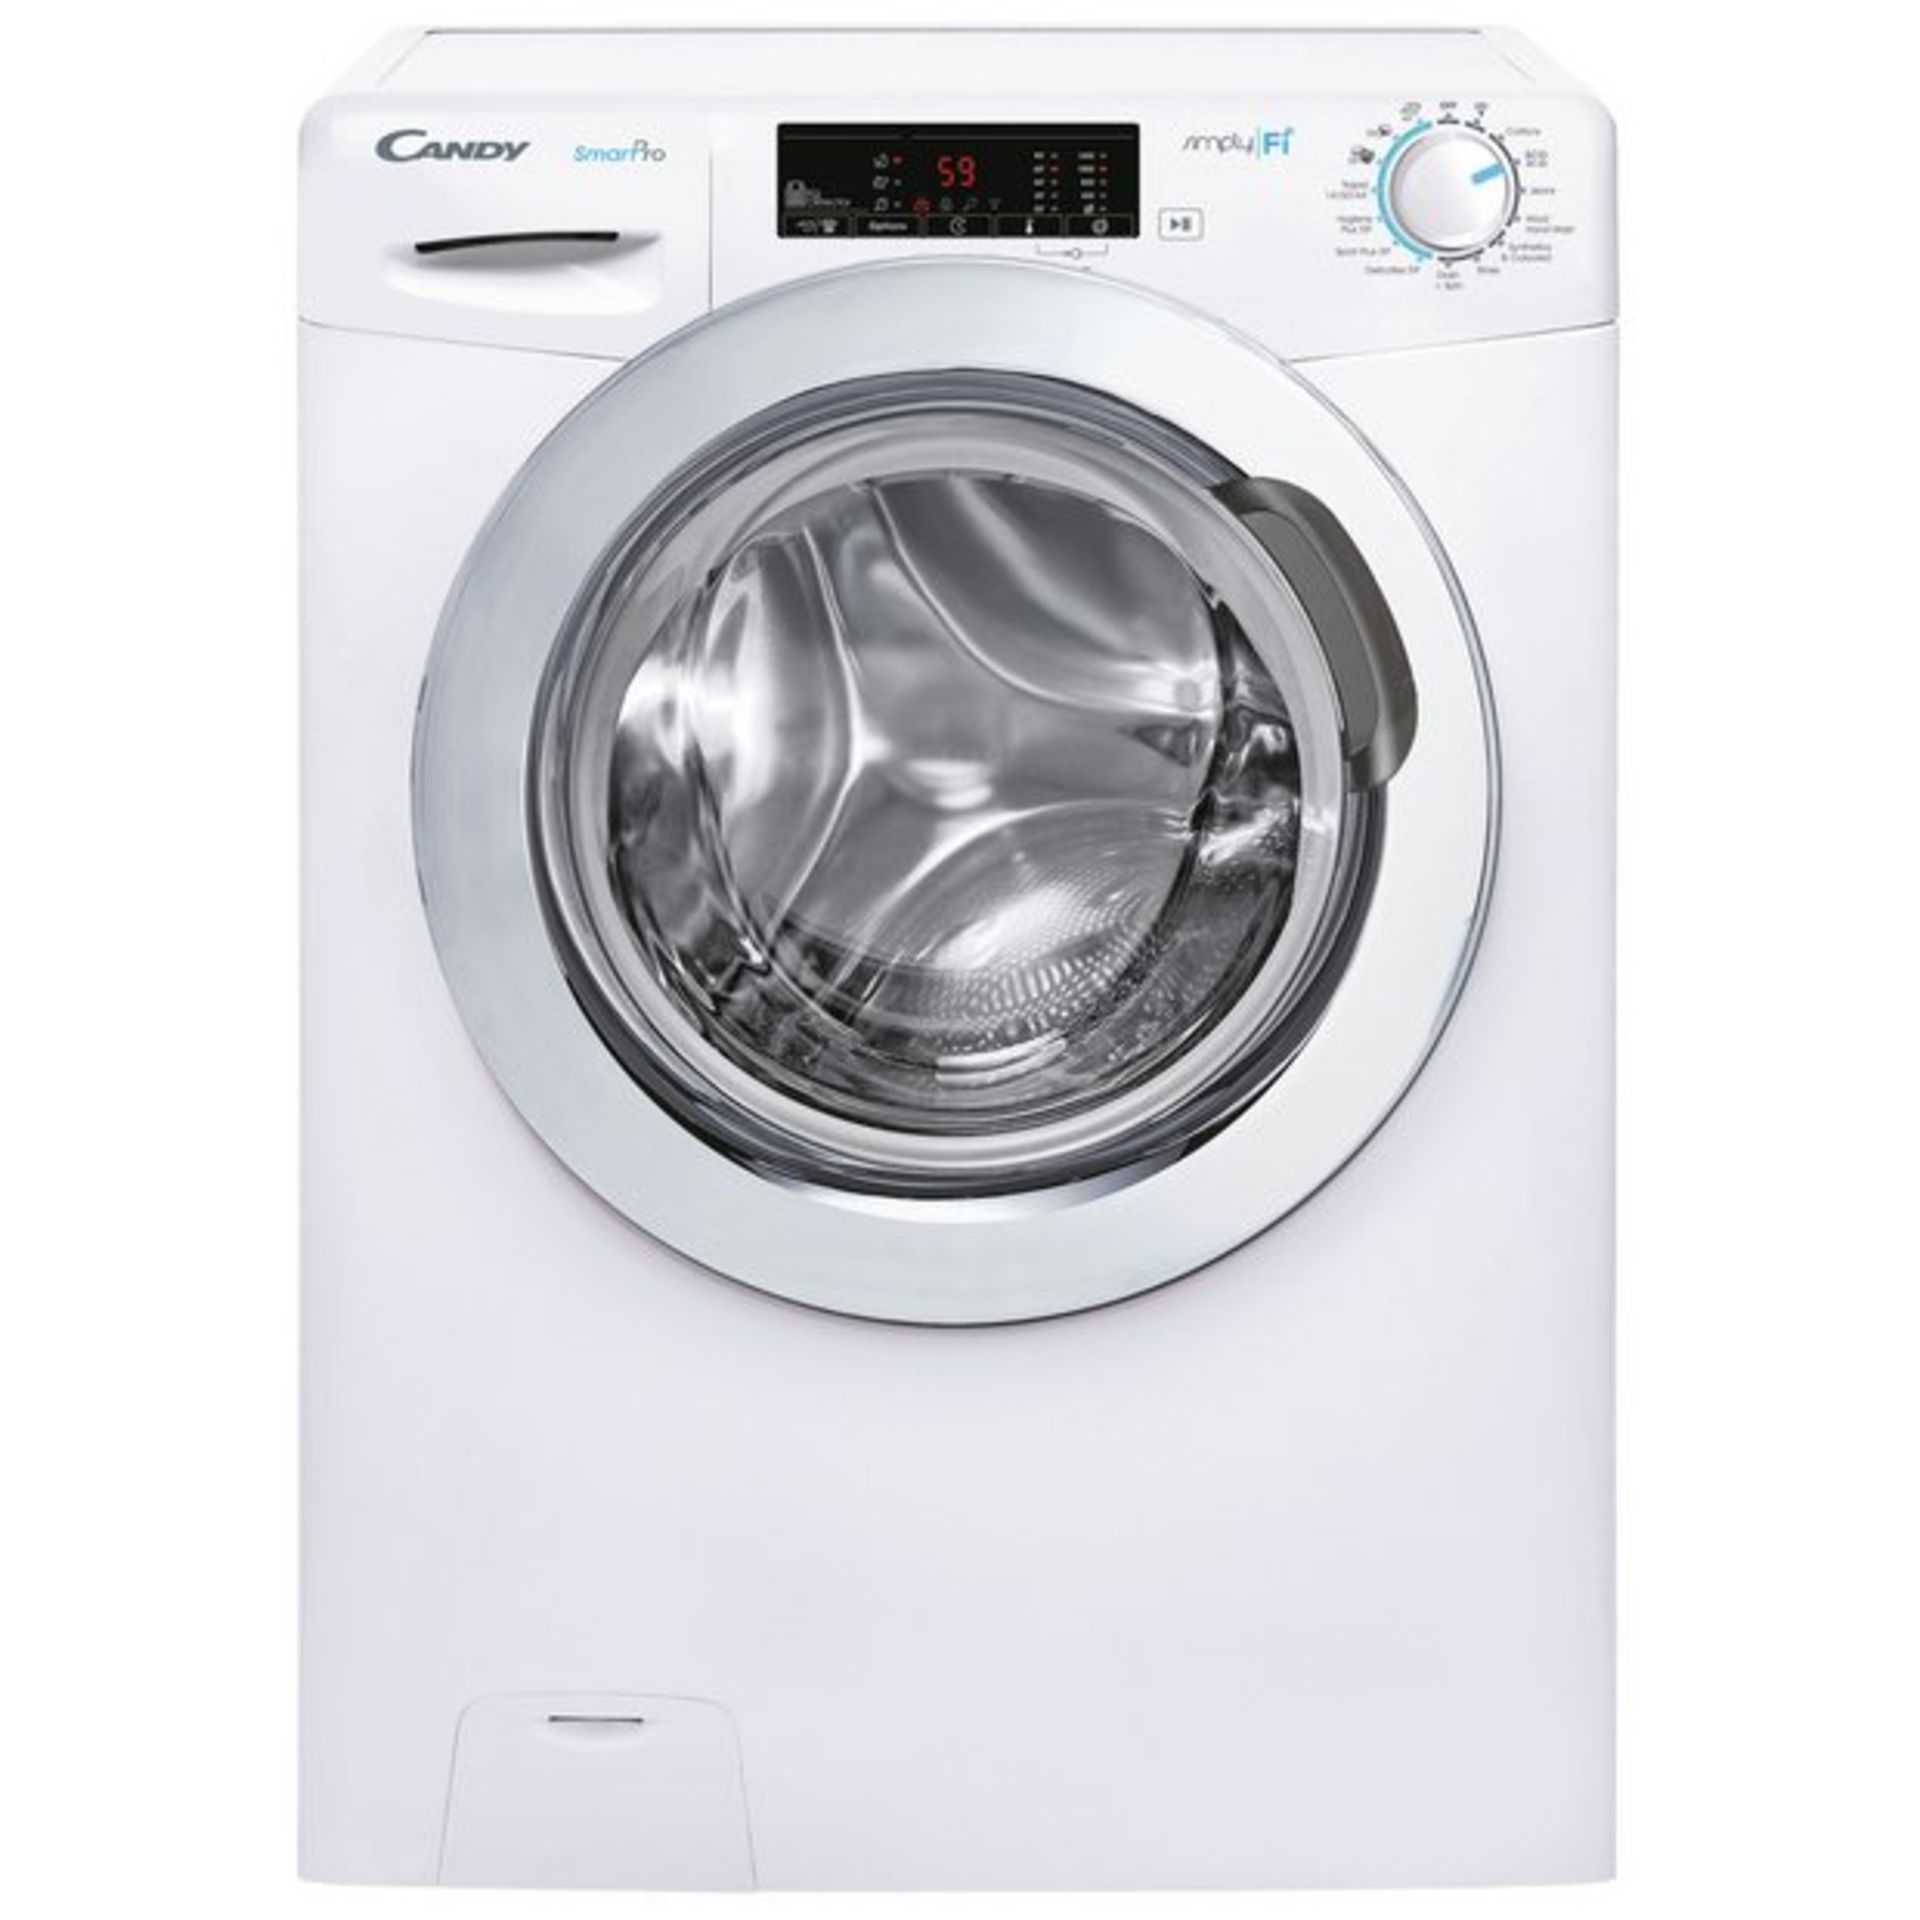 + VAT Grade A/B Candy CSO14103TWCE 10Kg 1400 Spin Washing Machine - 16 Programmes - 14 Minute Quick